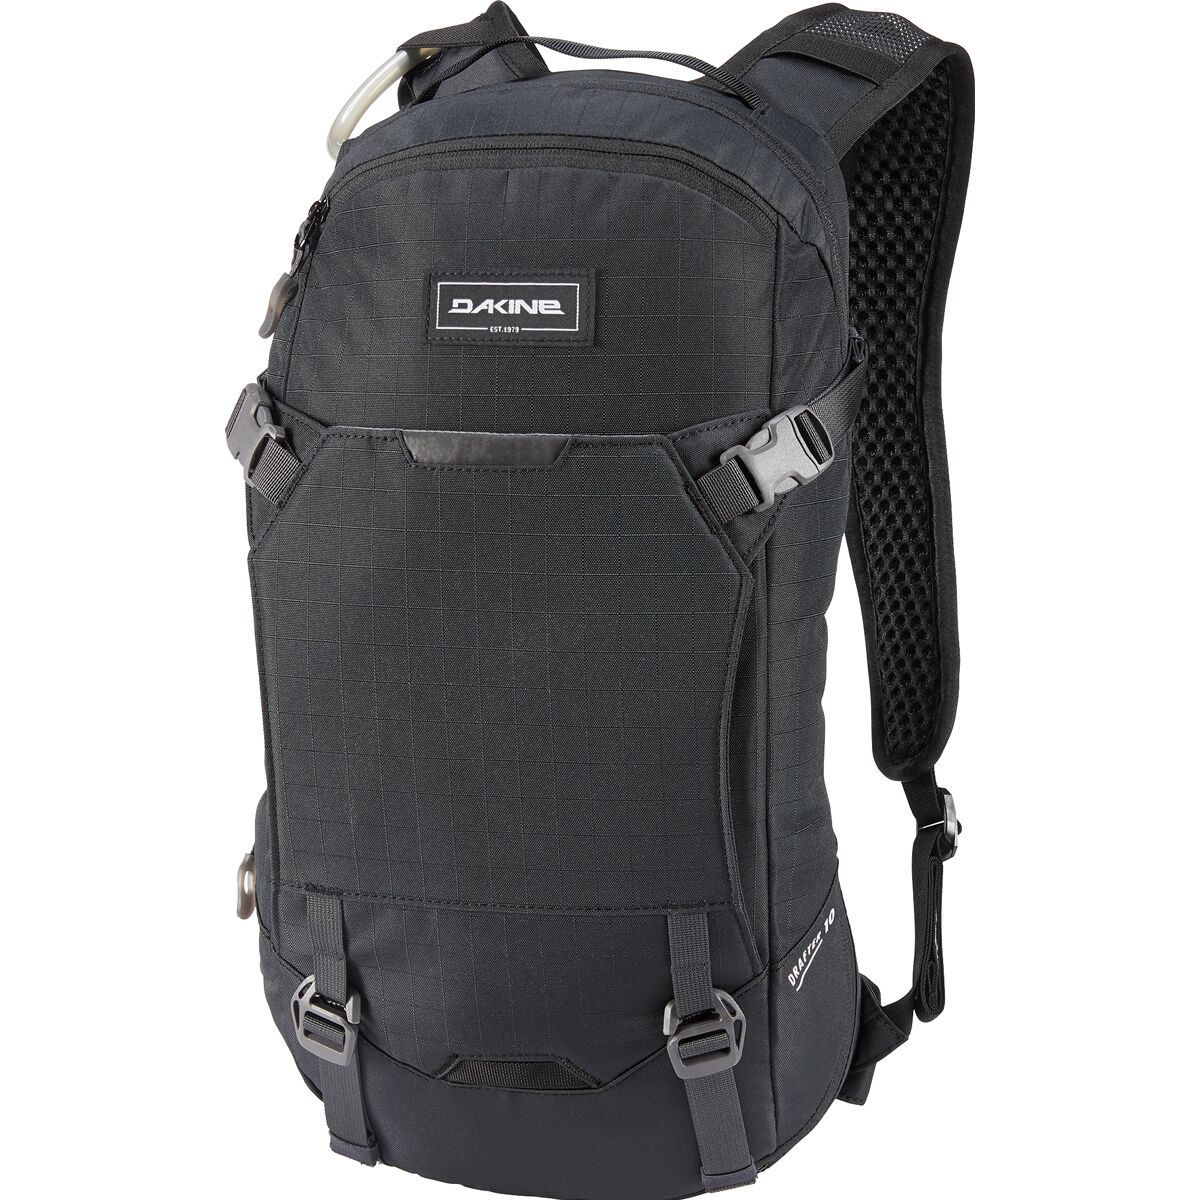 Photos - Backpack DAKINE Drafter 10L Hydration  